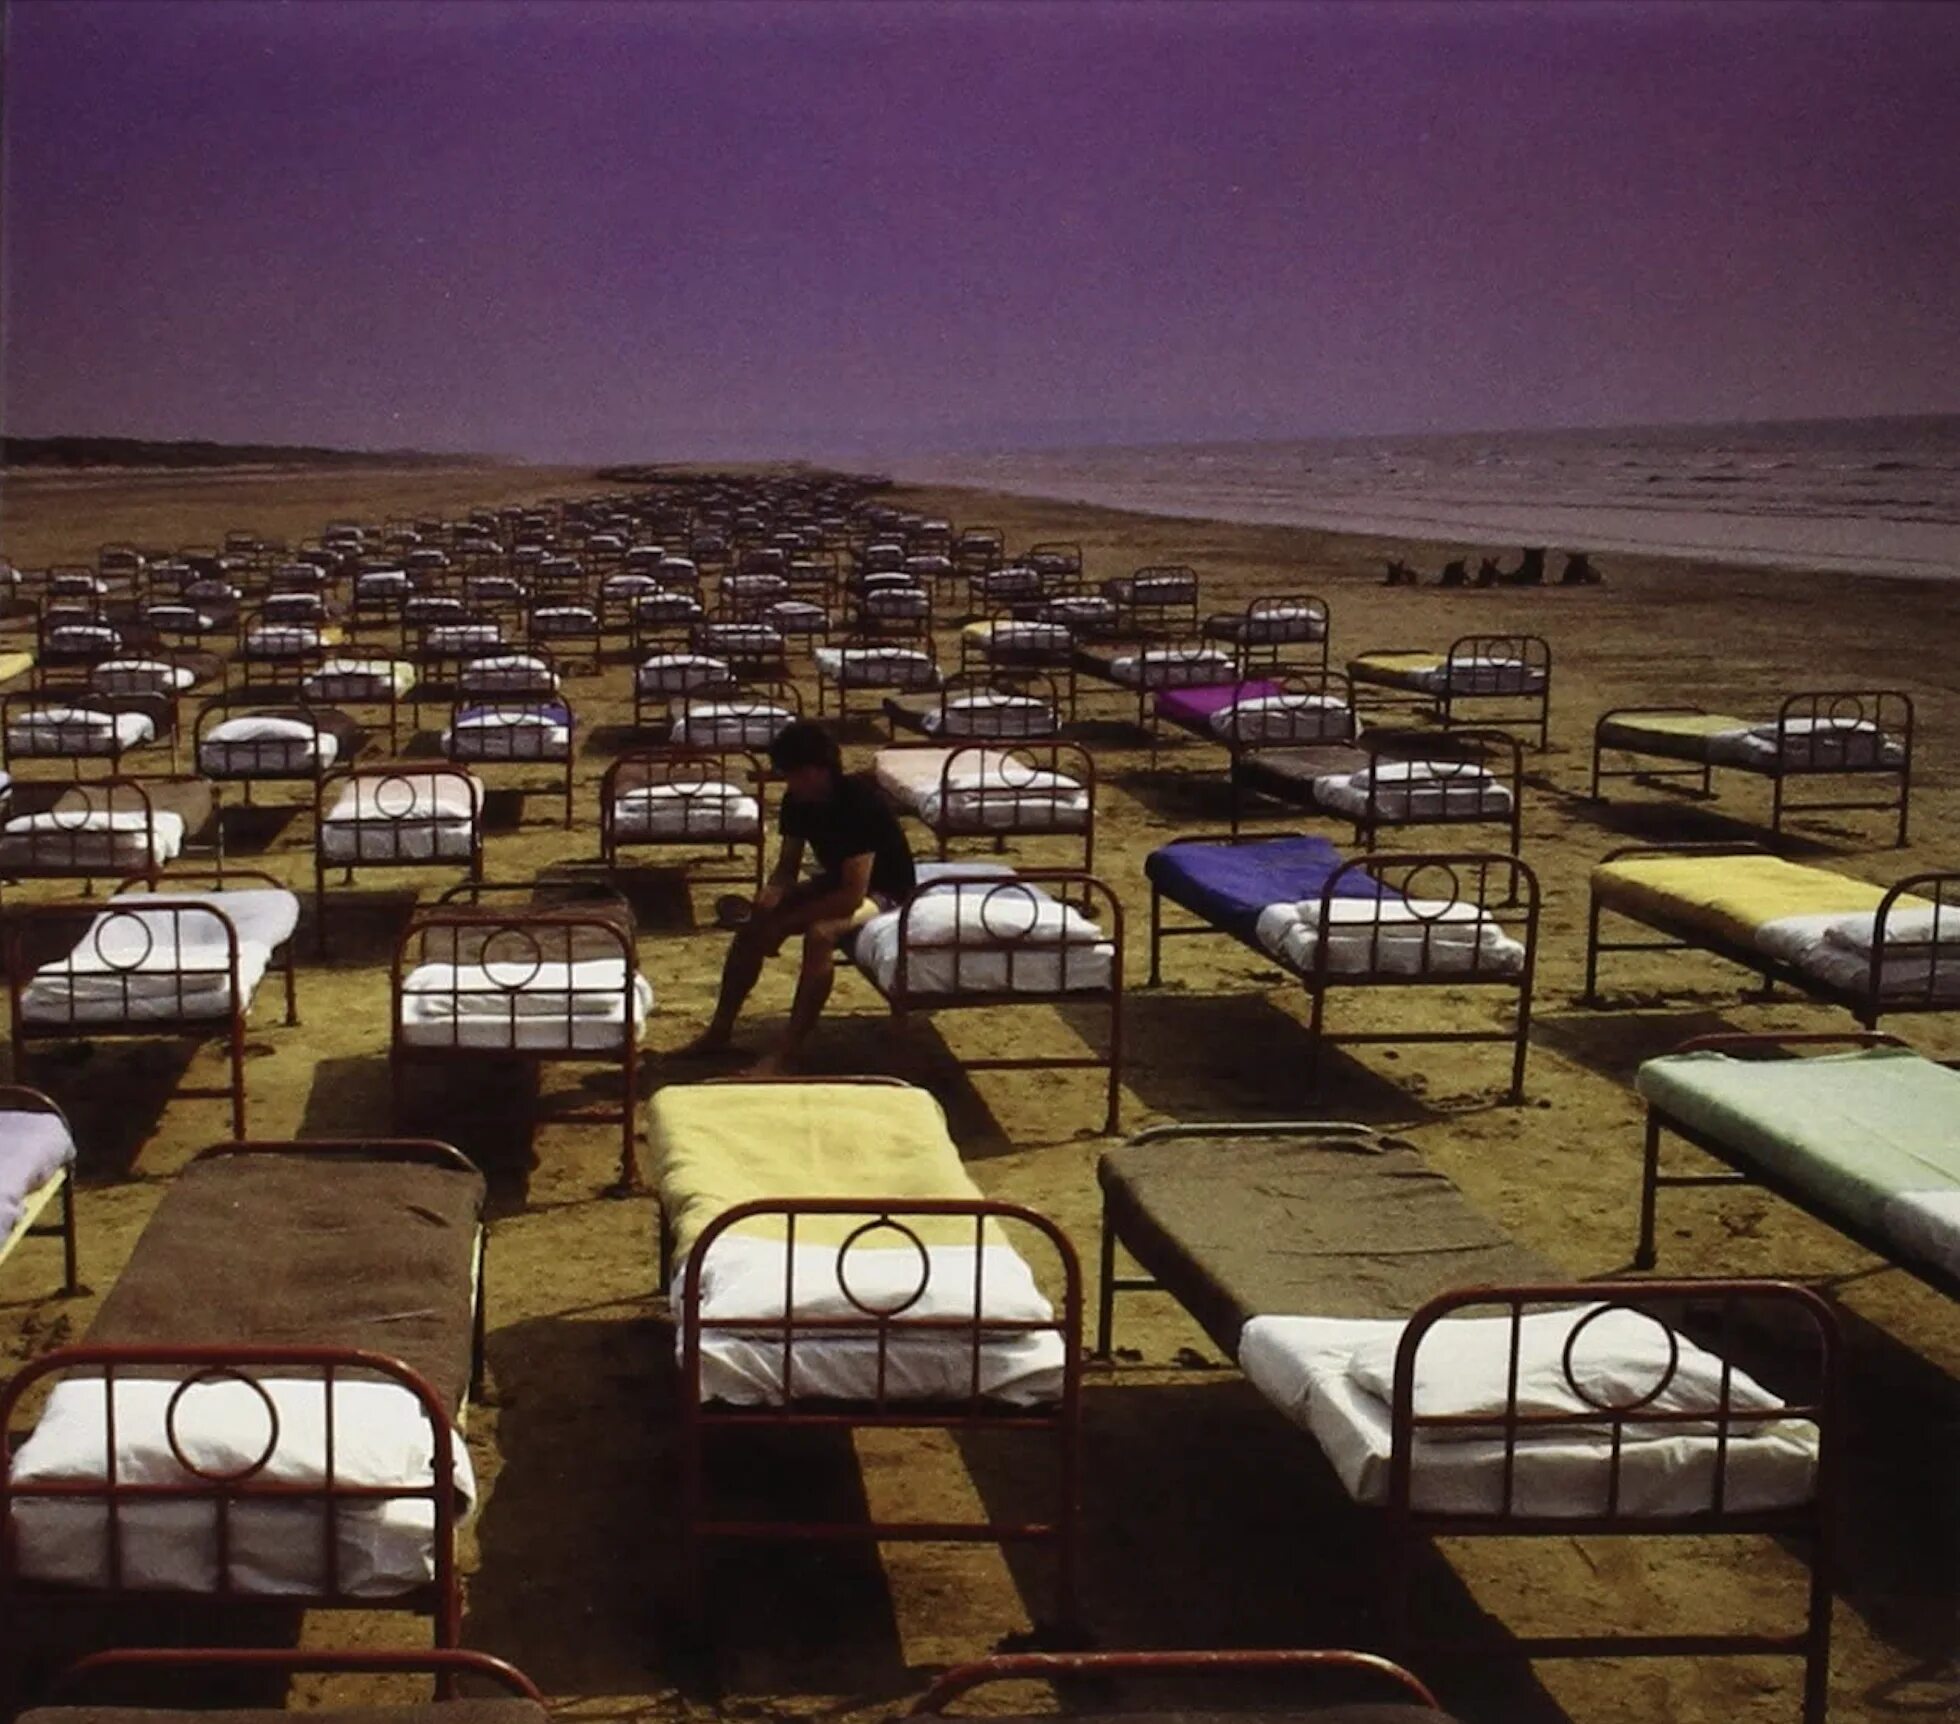 Momentary lapse of reasoning. Pink Floyd a Momentary lapse of reason. 1987 - A Momentary lapse of reason. A Momentary lapse of reason обложка. Pink Floyd - a Momentary lapse of reason 2021 Covers.